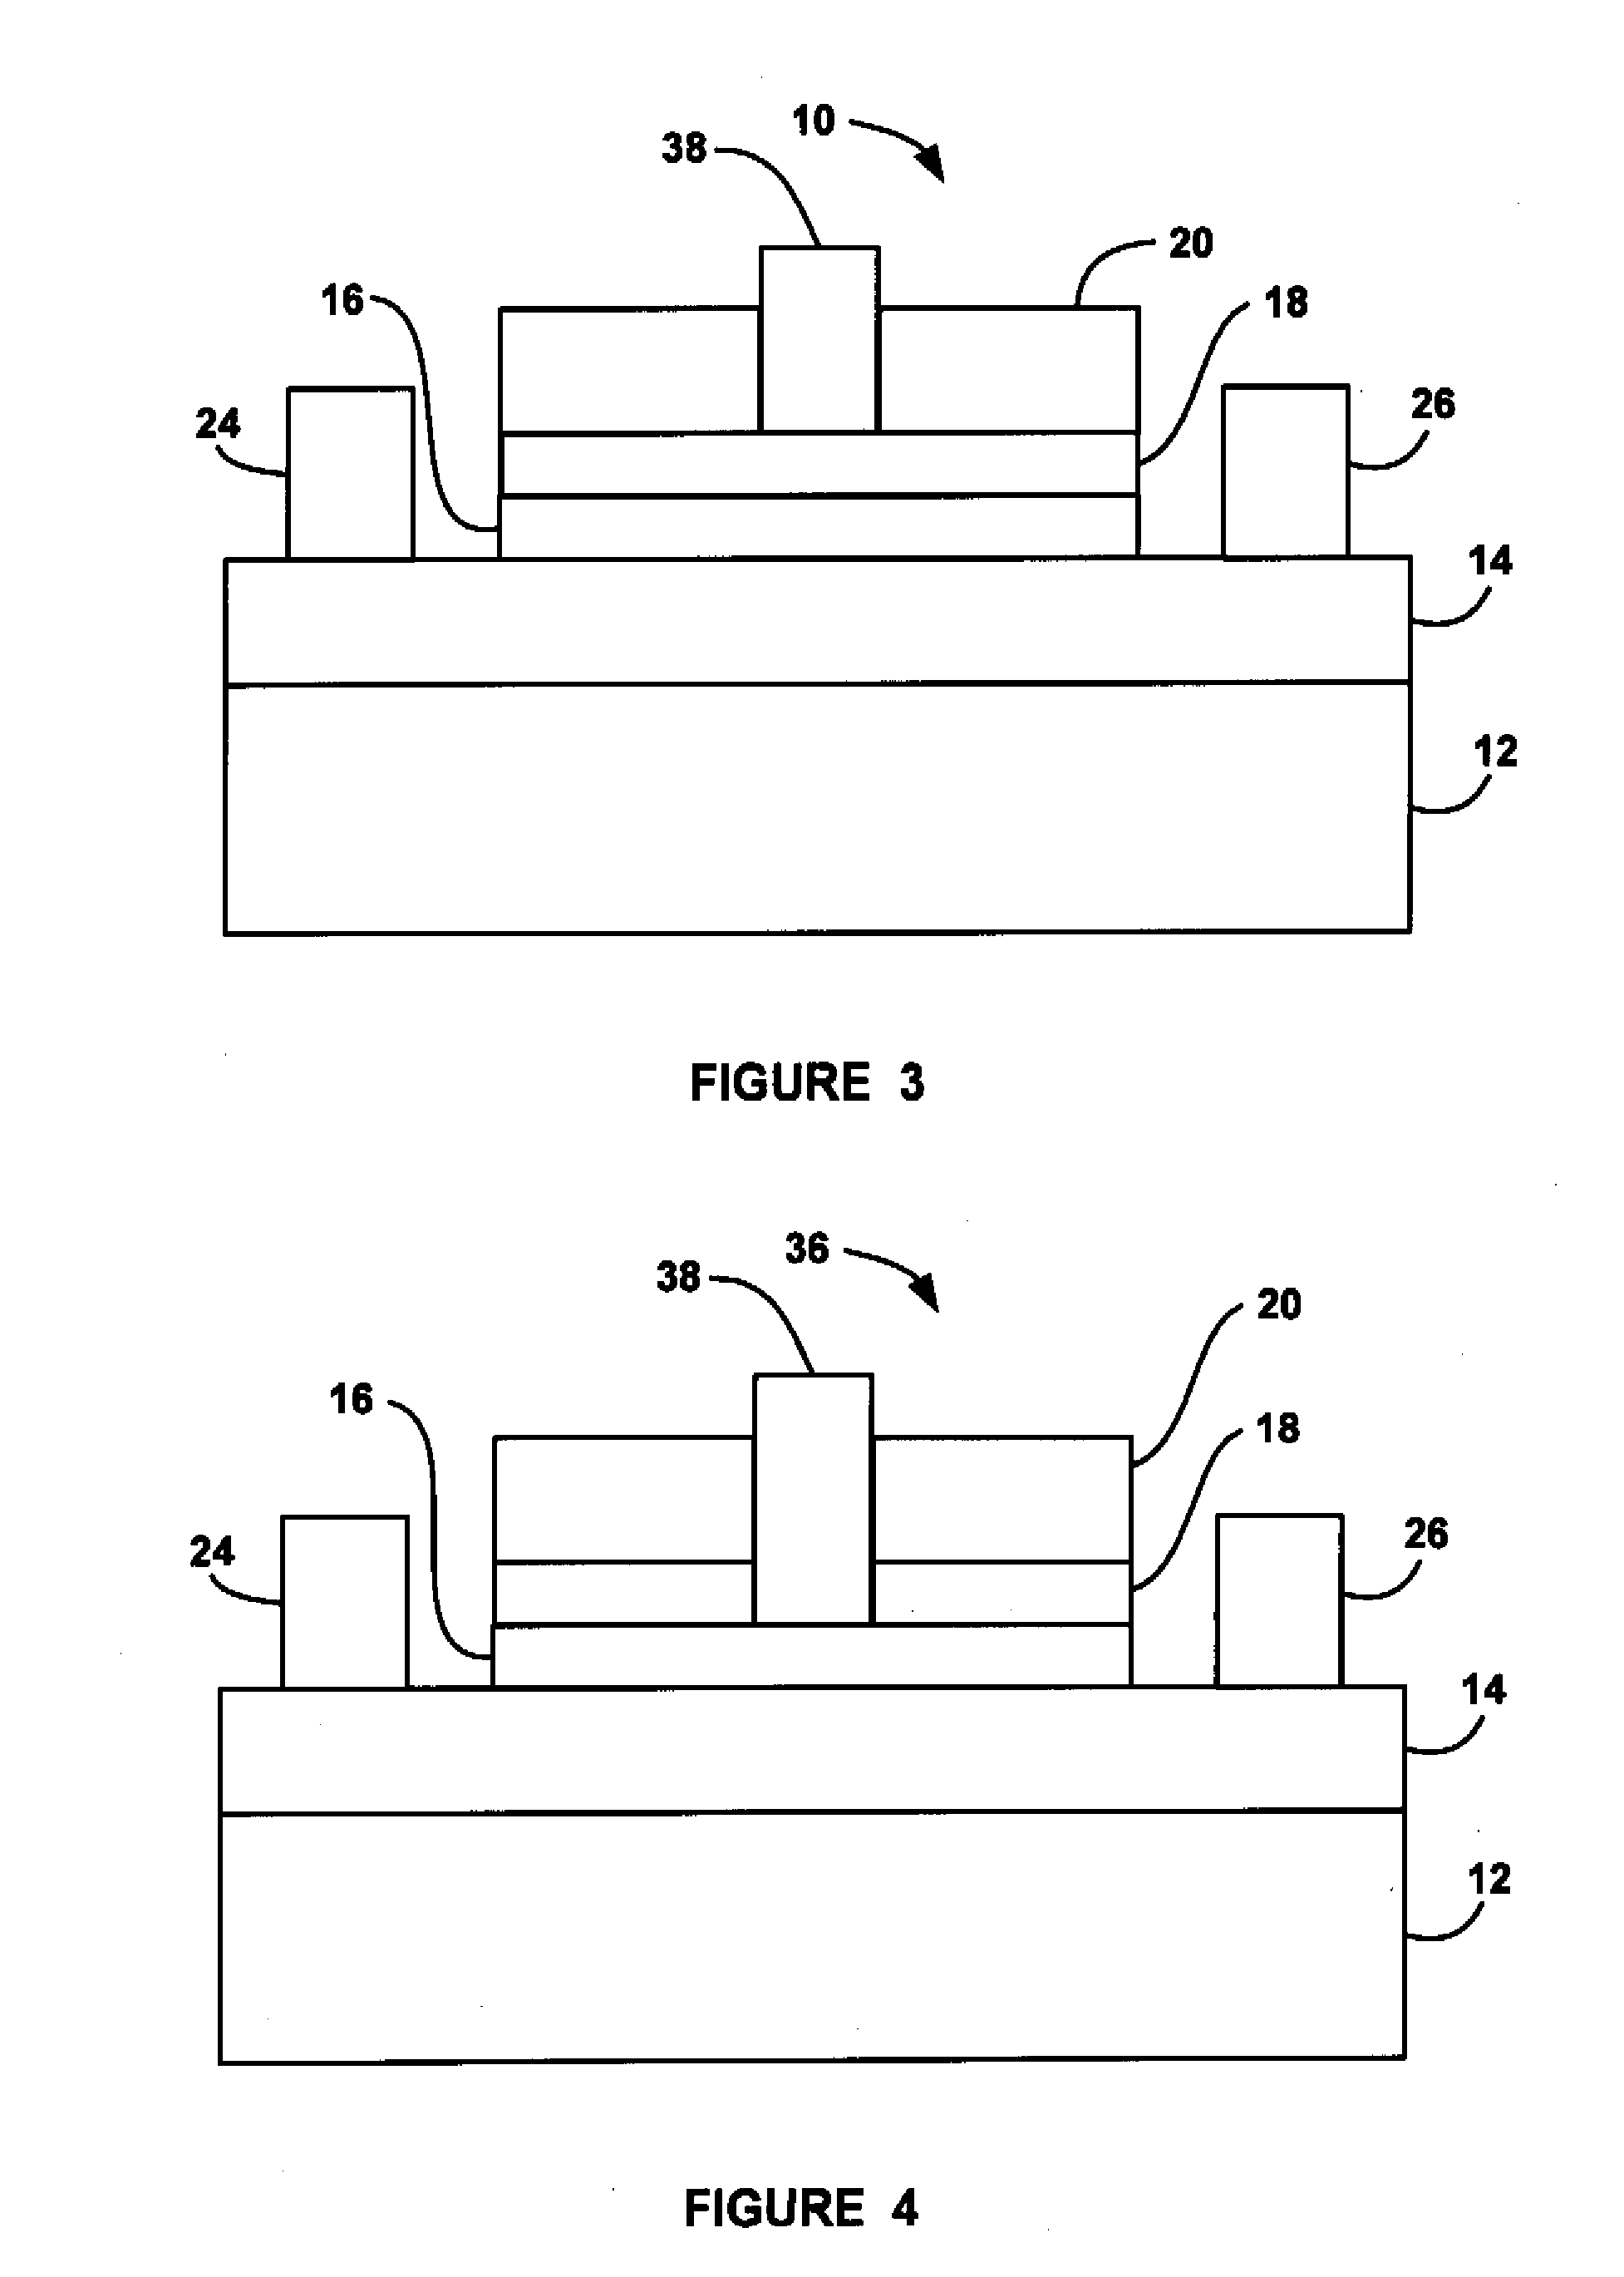 Method for Fabricating a Nitride FET Including Passivation Layers